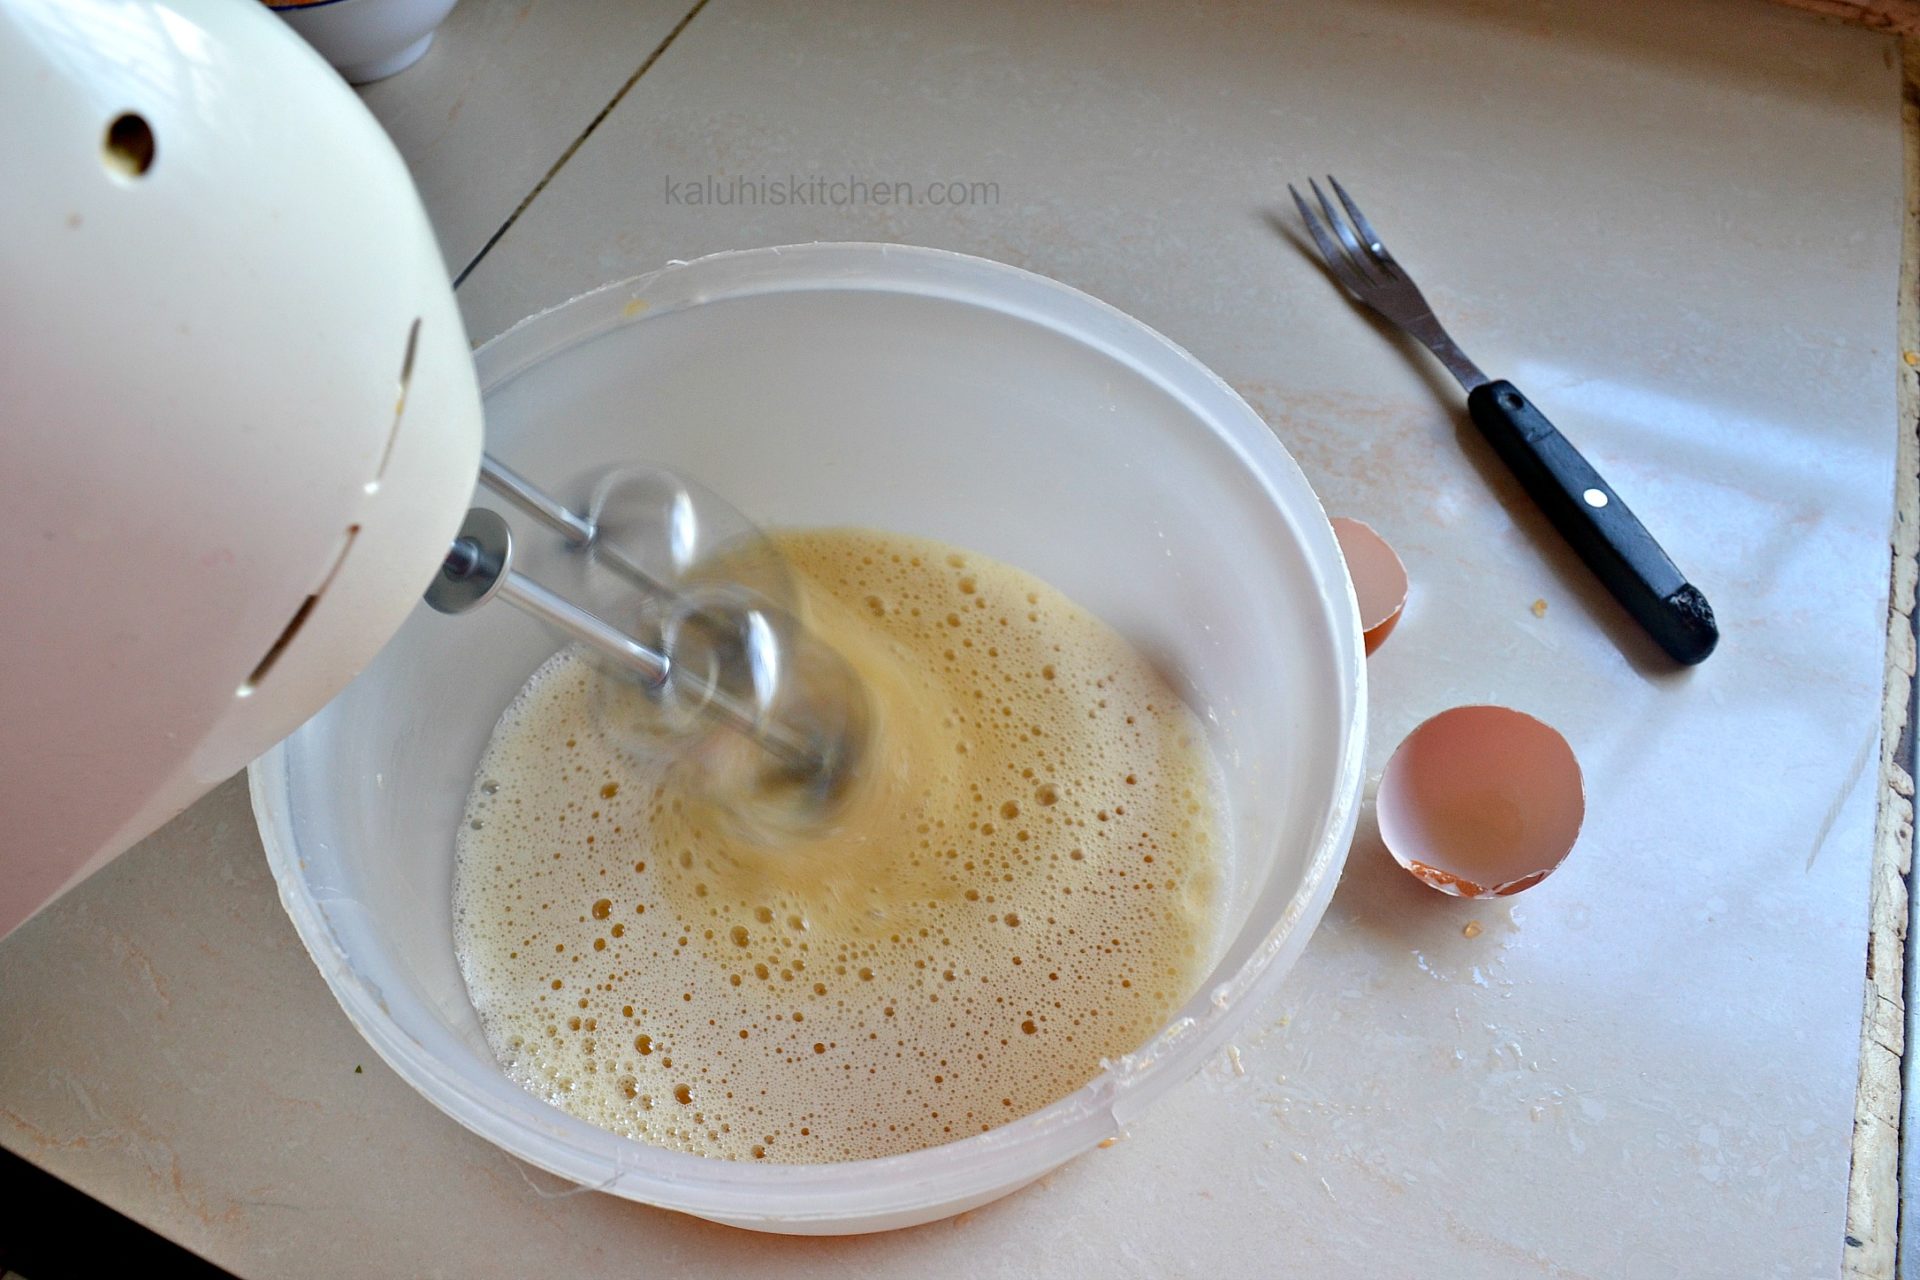 whisking the egg together with the sugar makes the overall mixture very light_kaluhiskitchen.com